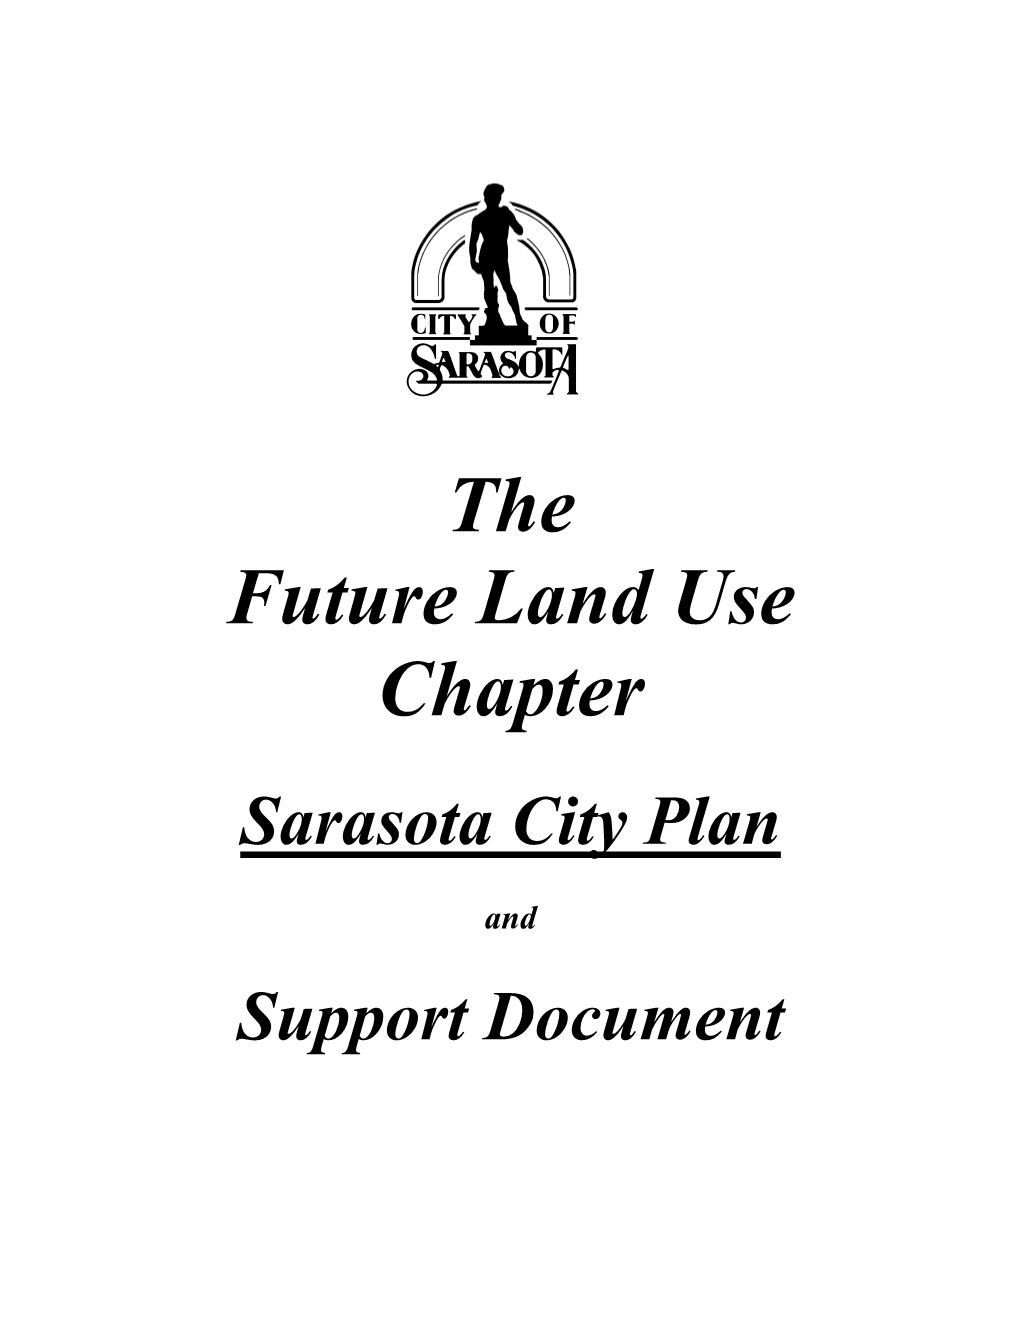 The Future Land Use Chapter, Sarasota City Plan and Support